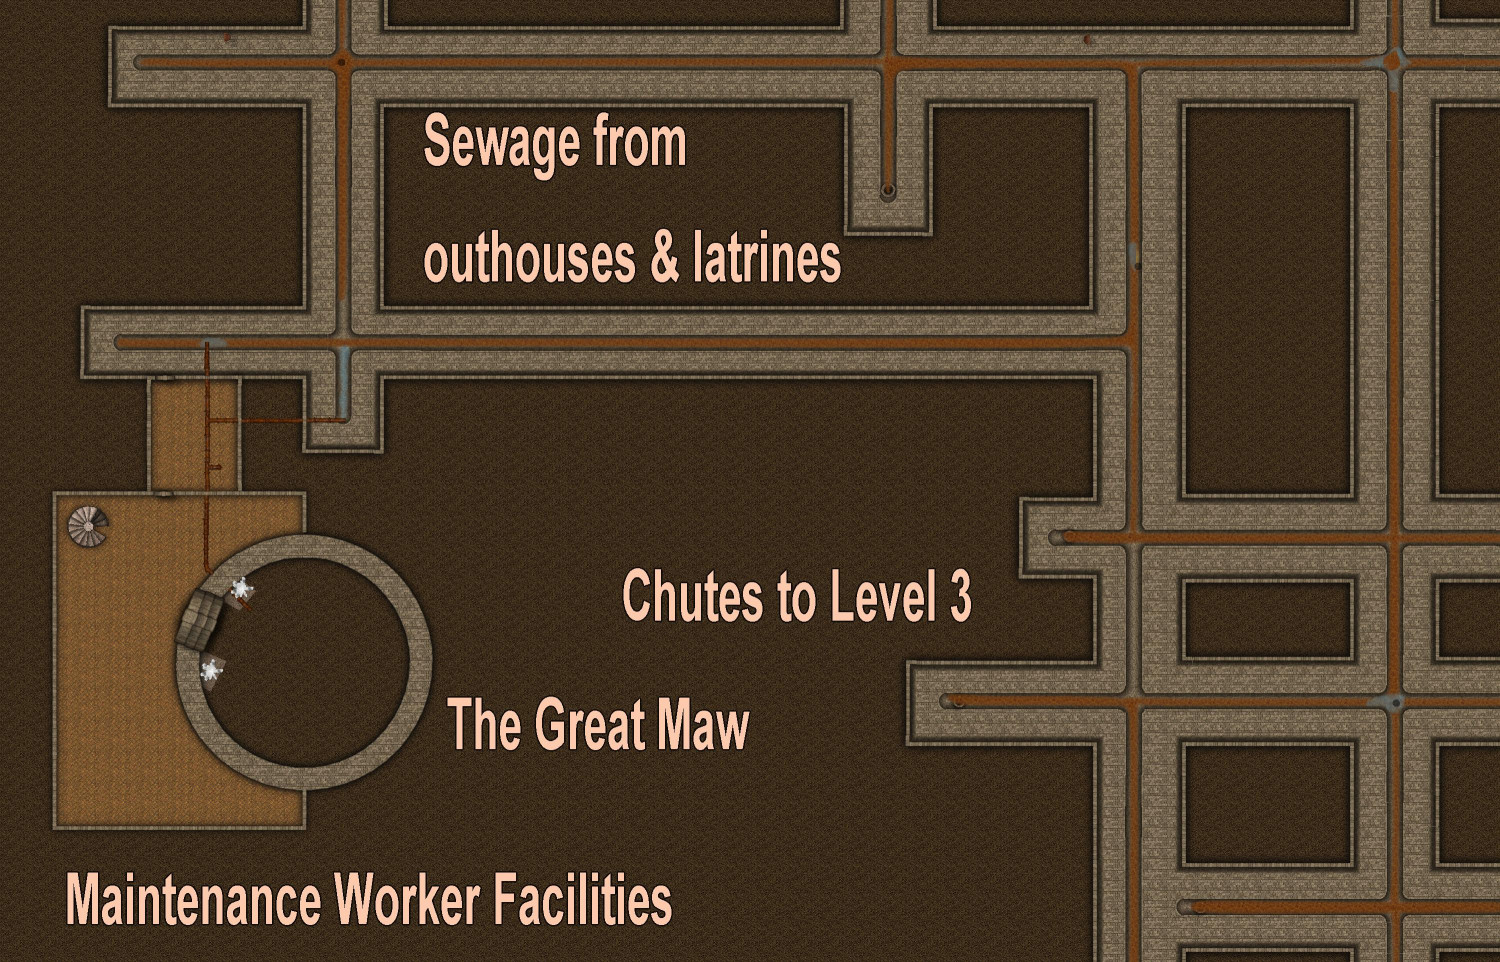 Town Sewer System - Level 2 - 01.JPG